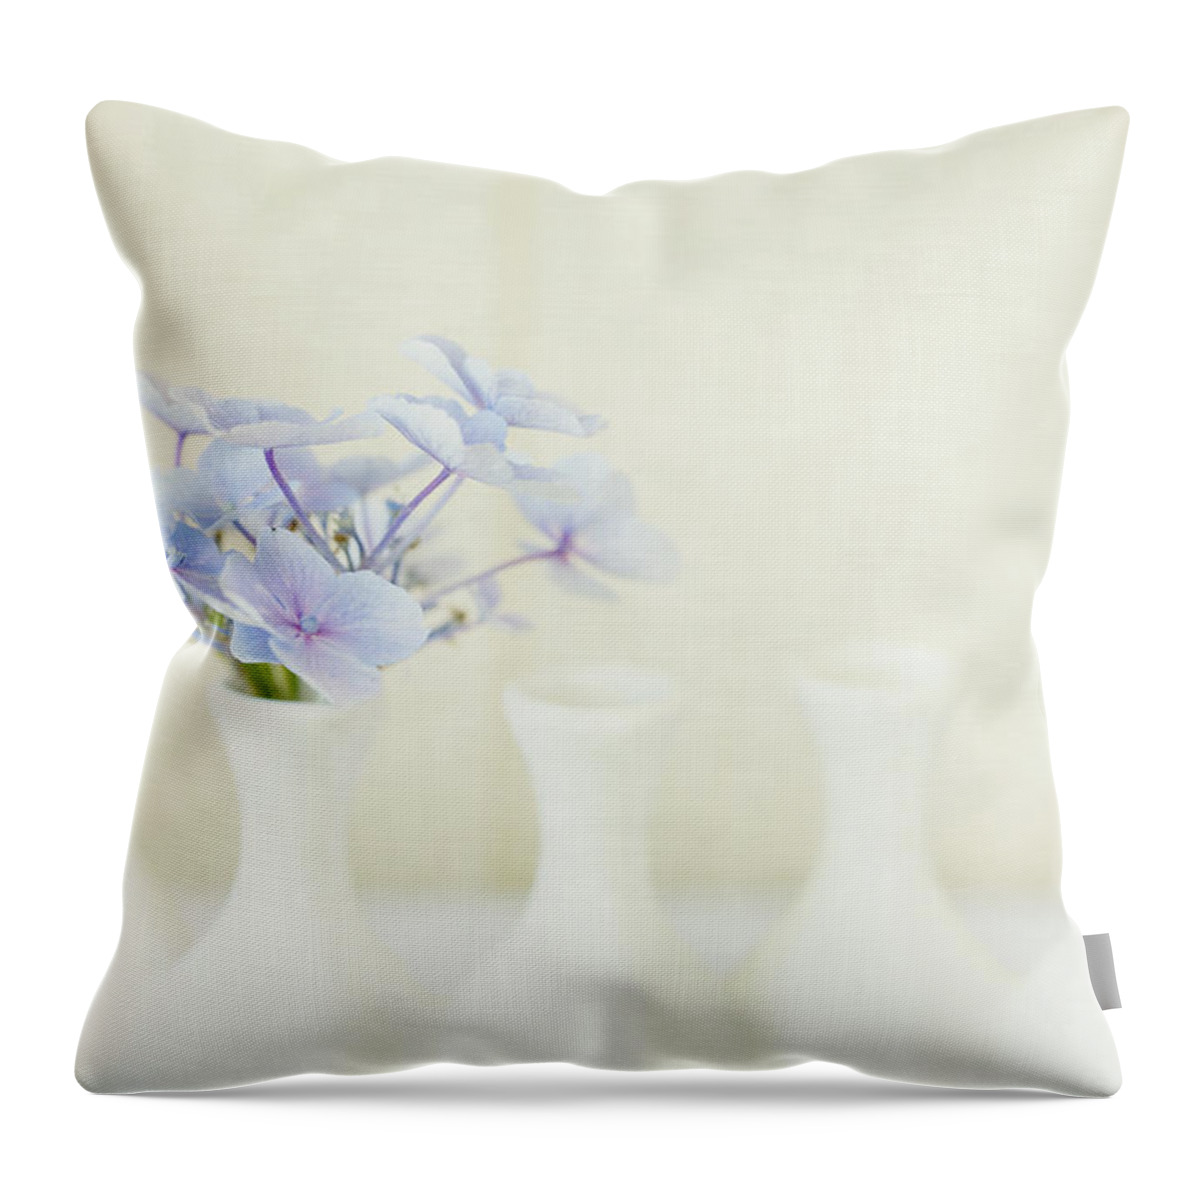 Dreamy Throw Pillow featuring the photograph All Alone by Bonnie Bruno